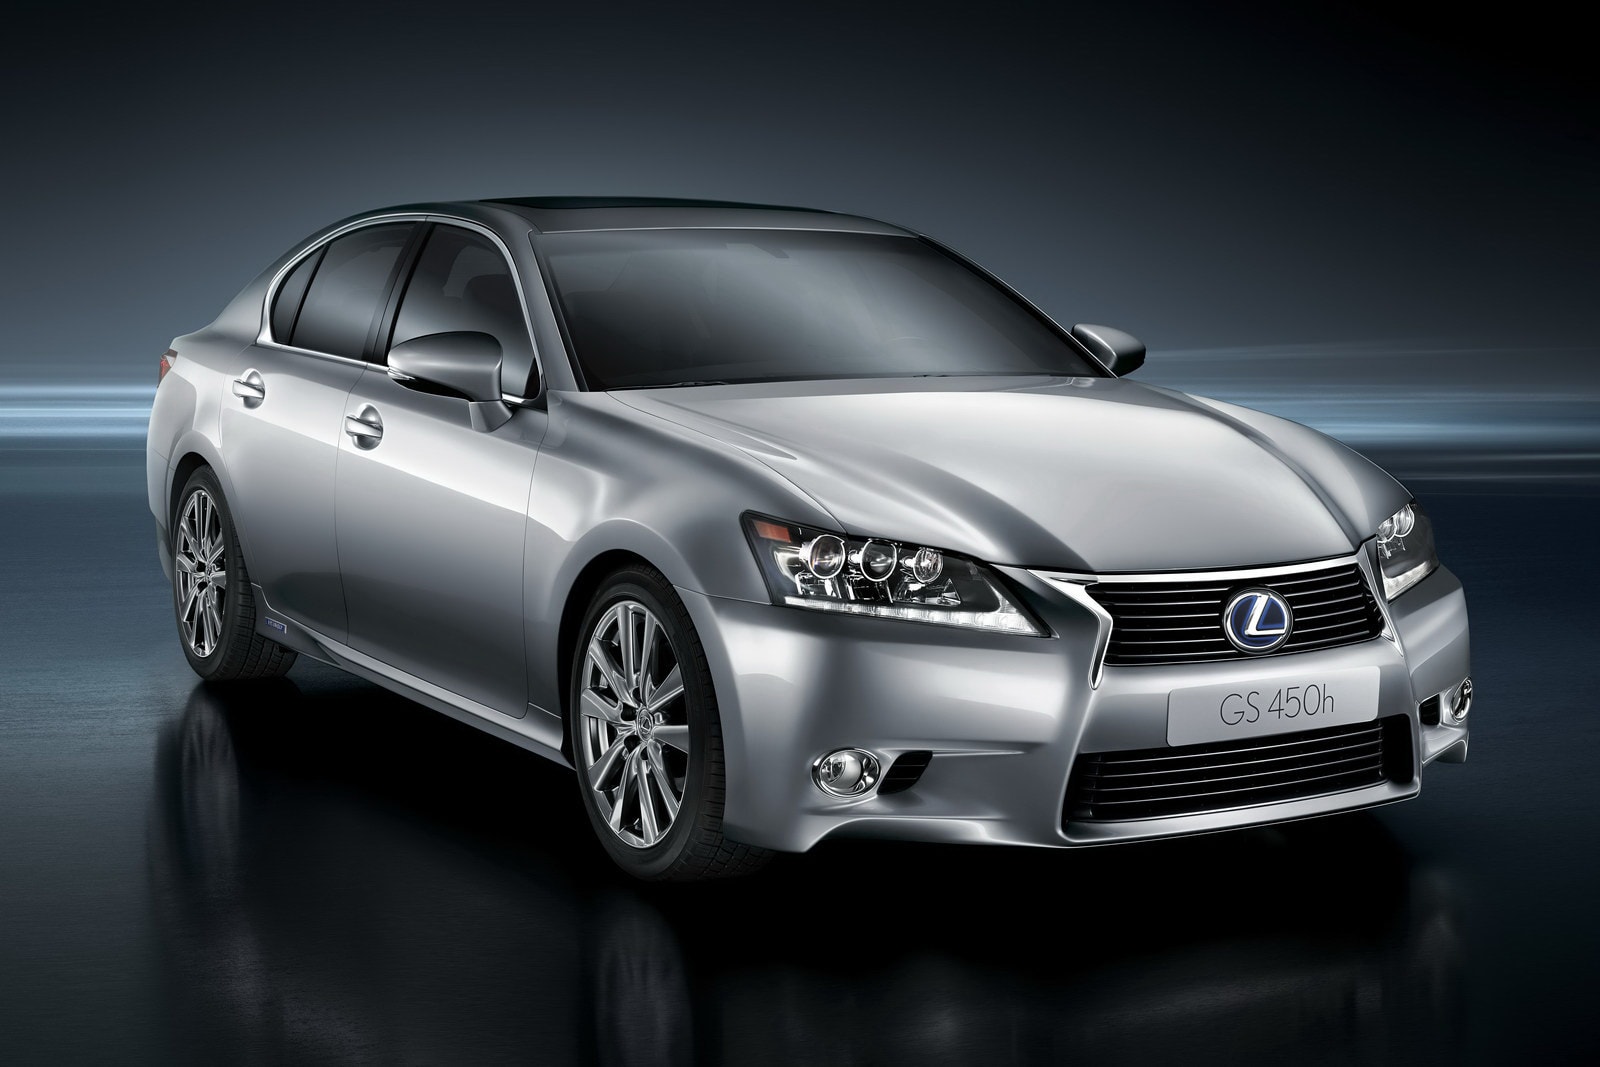 2013 Lexus GS 450h Officially Revealed Ahead of Frankfurt